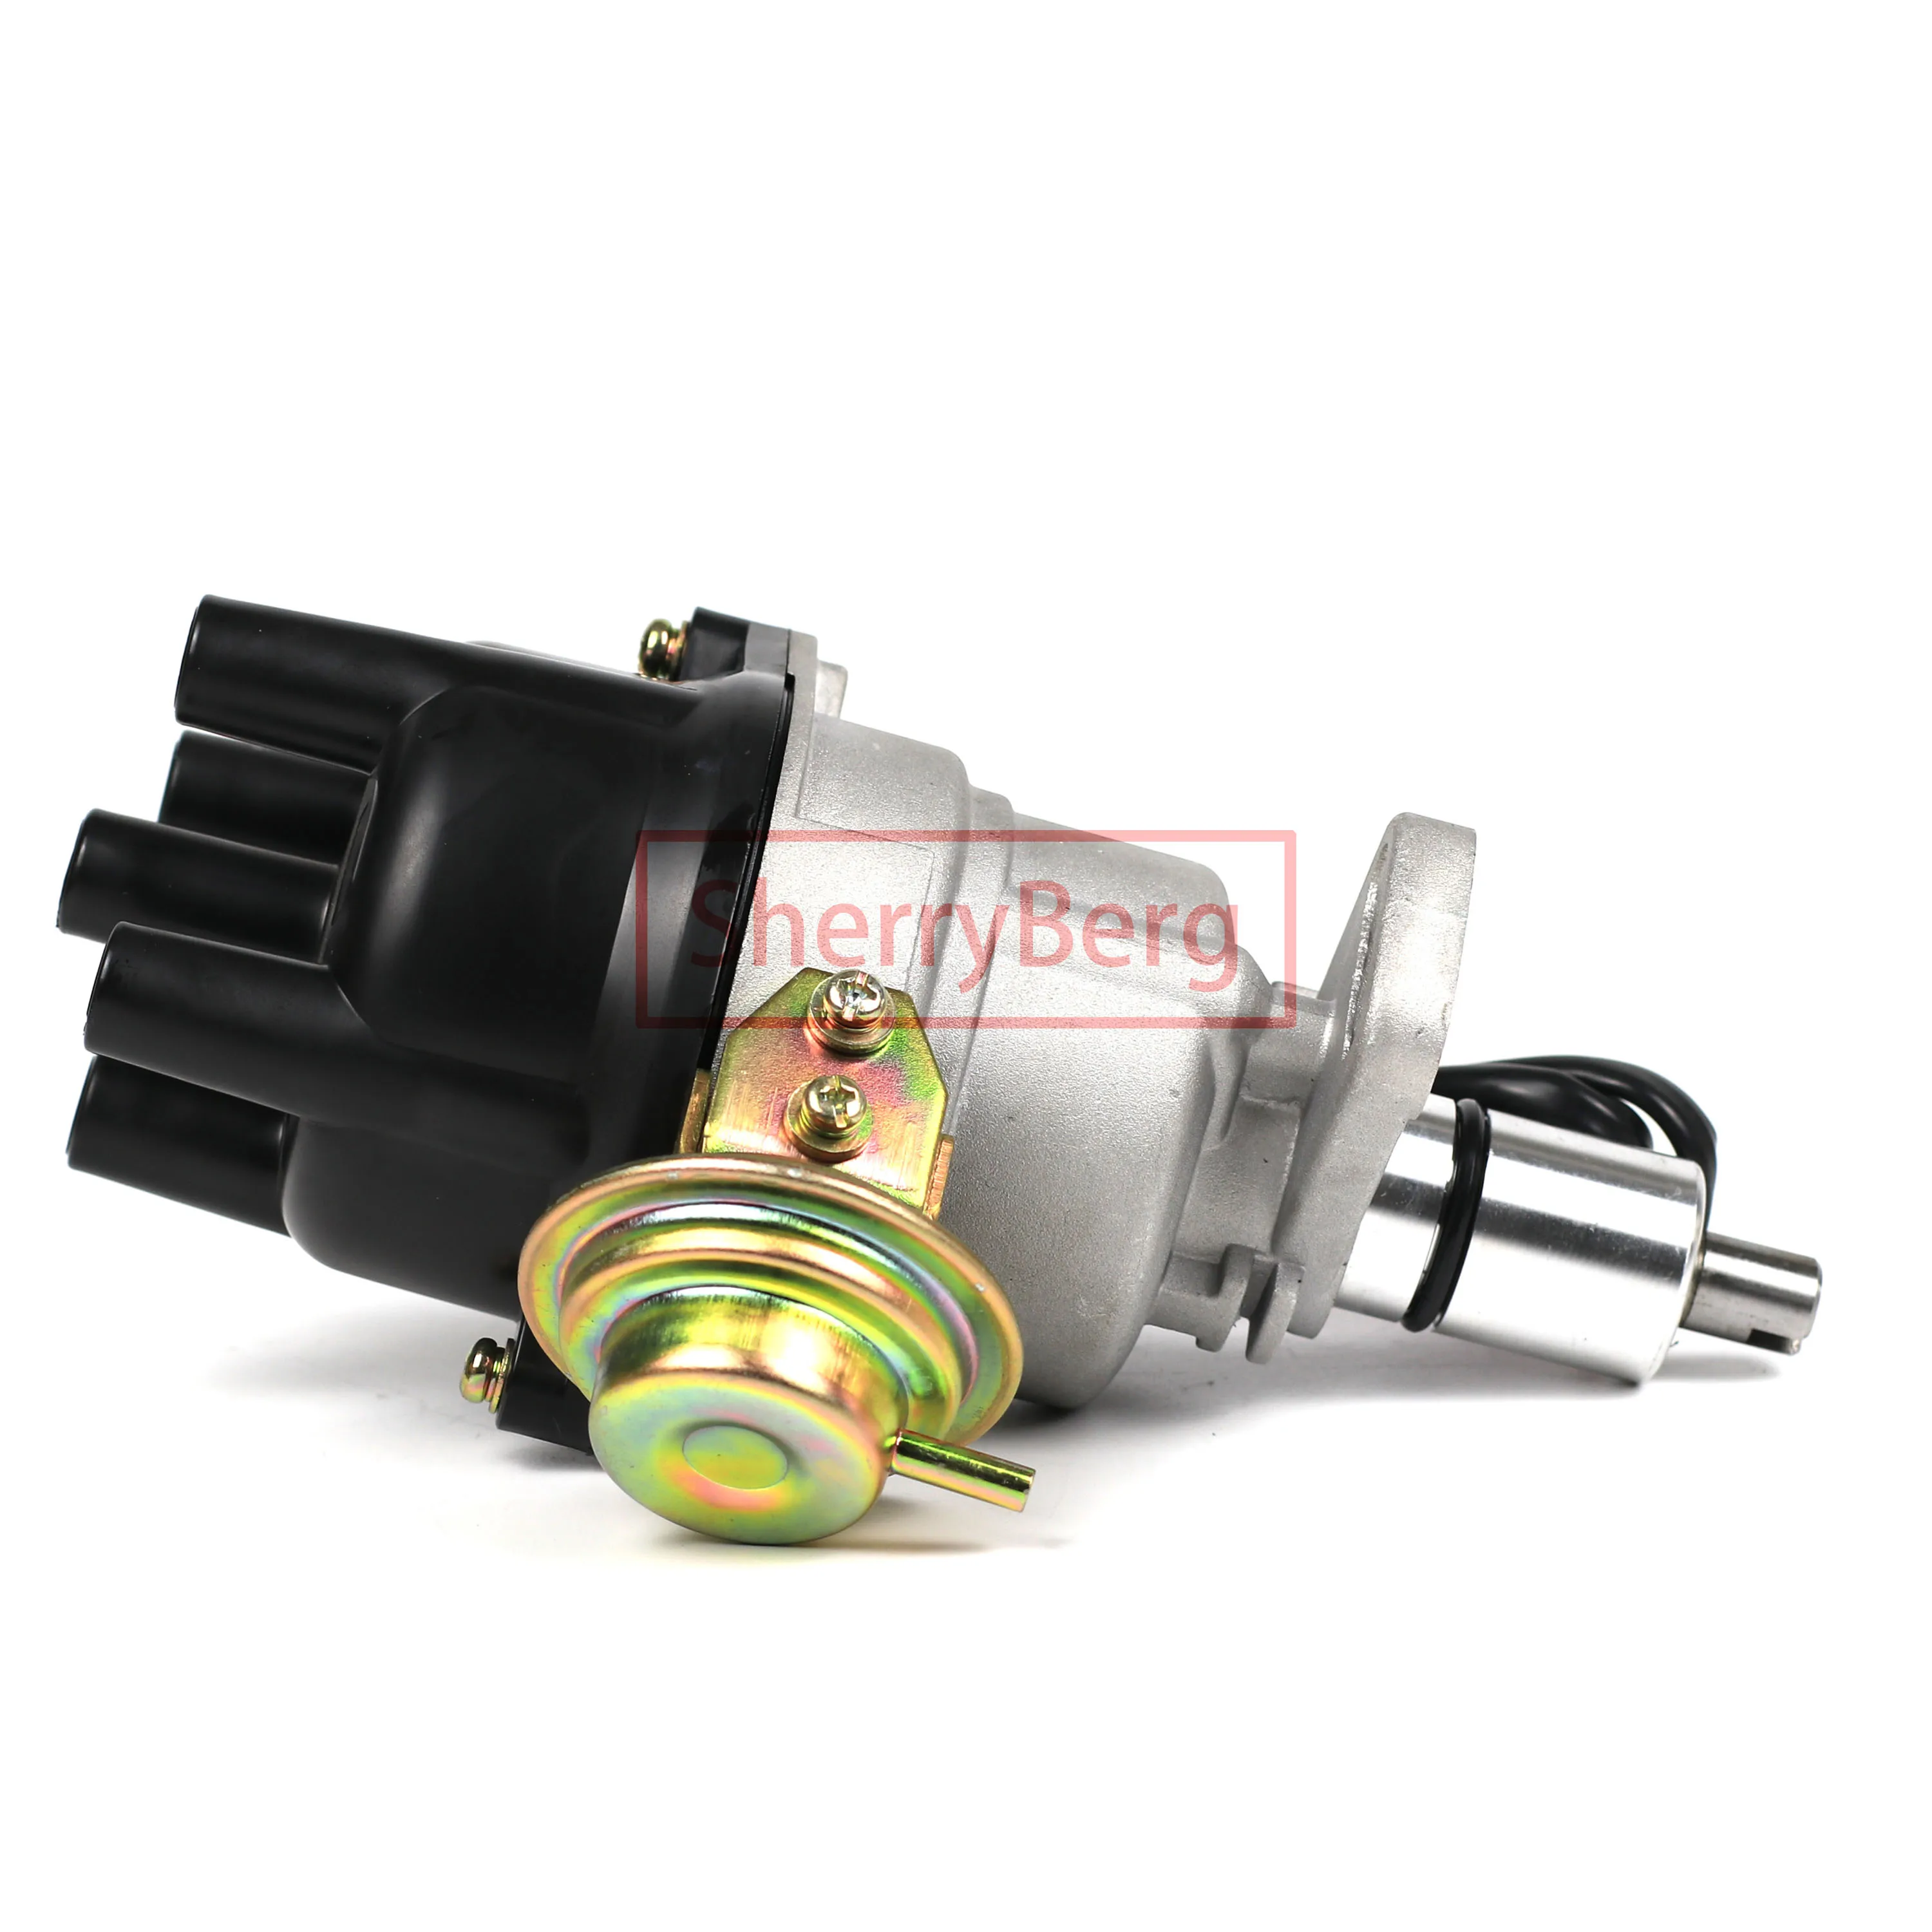 SherryBerg NEW COMPLETE ELECTRICAL ELECTRONIC IGNITION DISTRIBUTOR Fits FOR Nissan DATSUN Sentra SUNNY B11 & B12 E15  B310